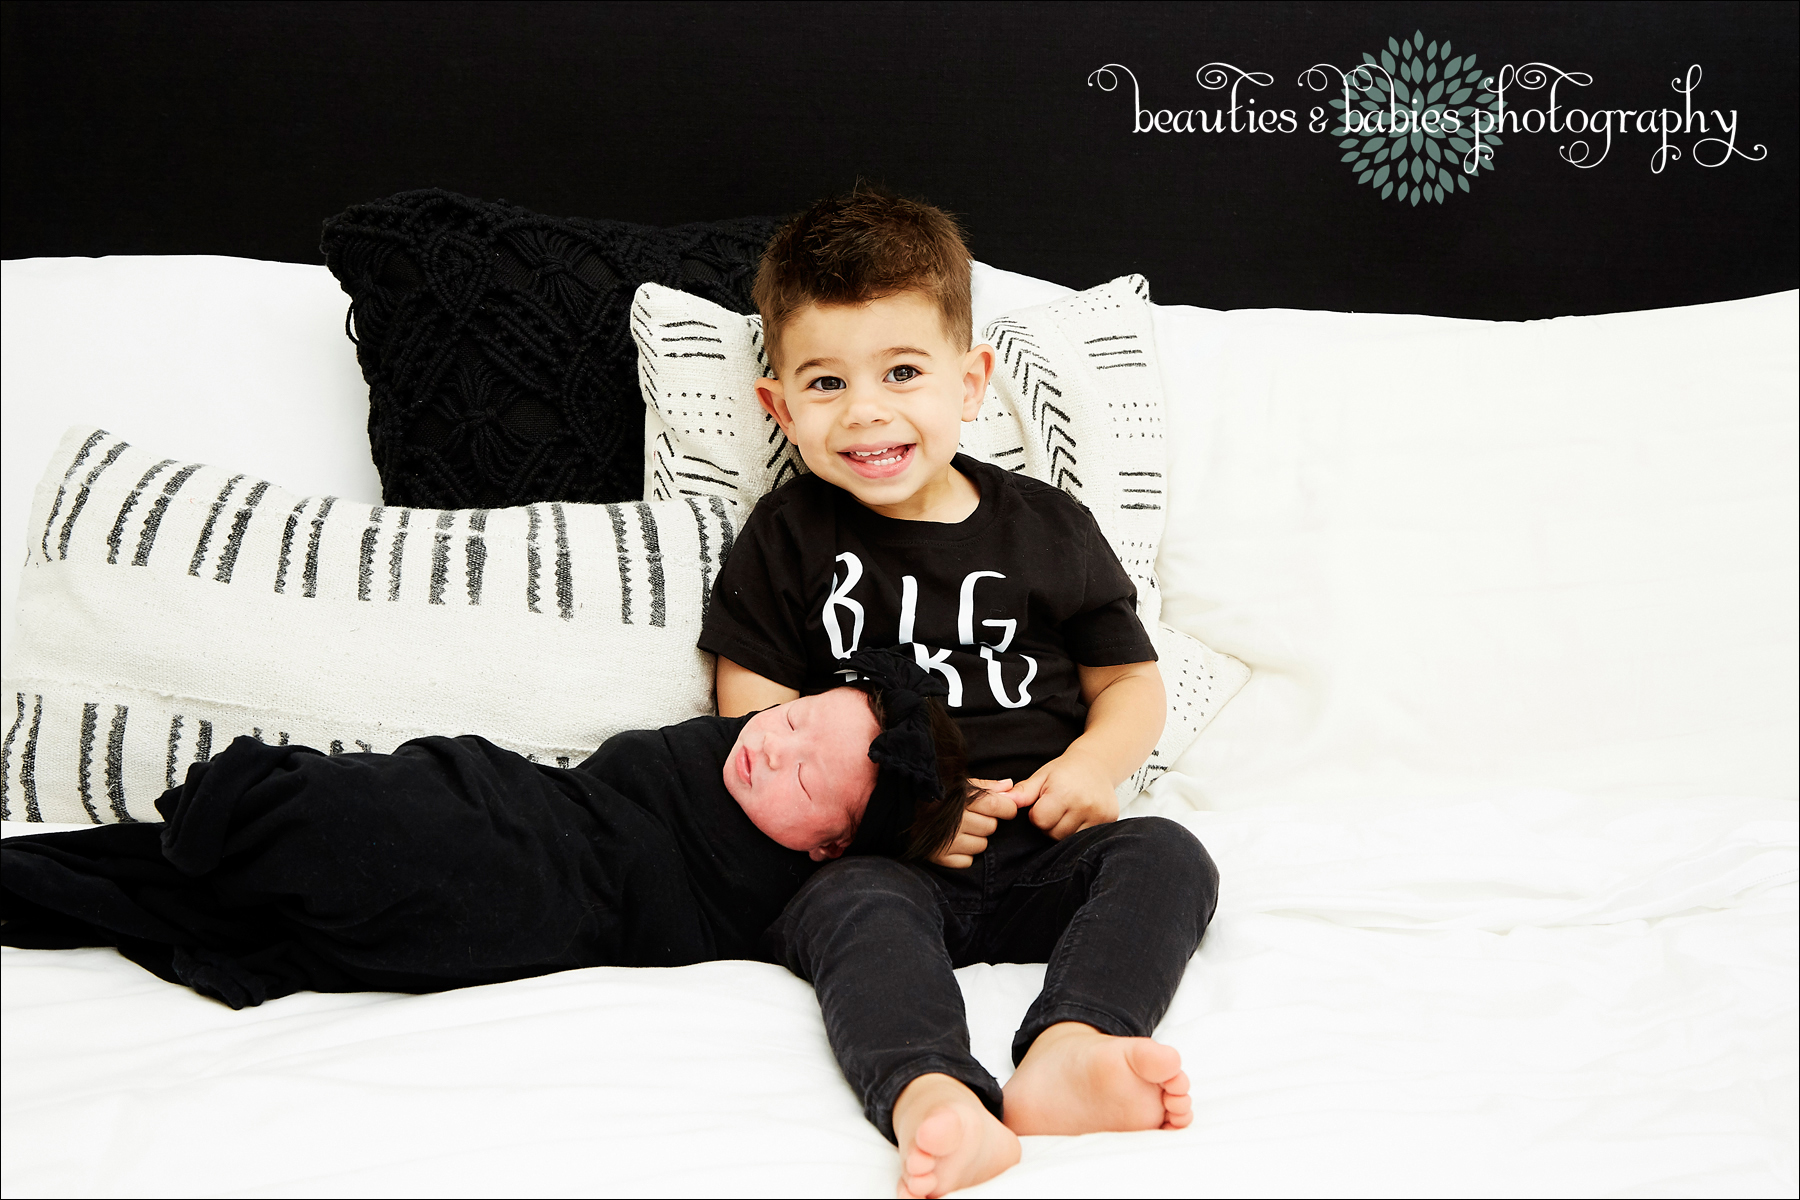 newborn photographer Los Angeles, in-home Los Angeles baby photographer, newborn baby photography Los Angeles Photographer, family photography at home, Los Angeles family lifestyle photography, big brother pictures